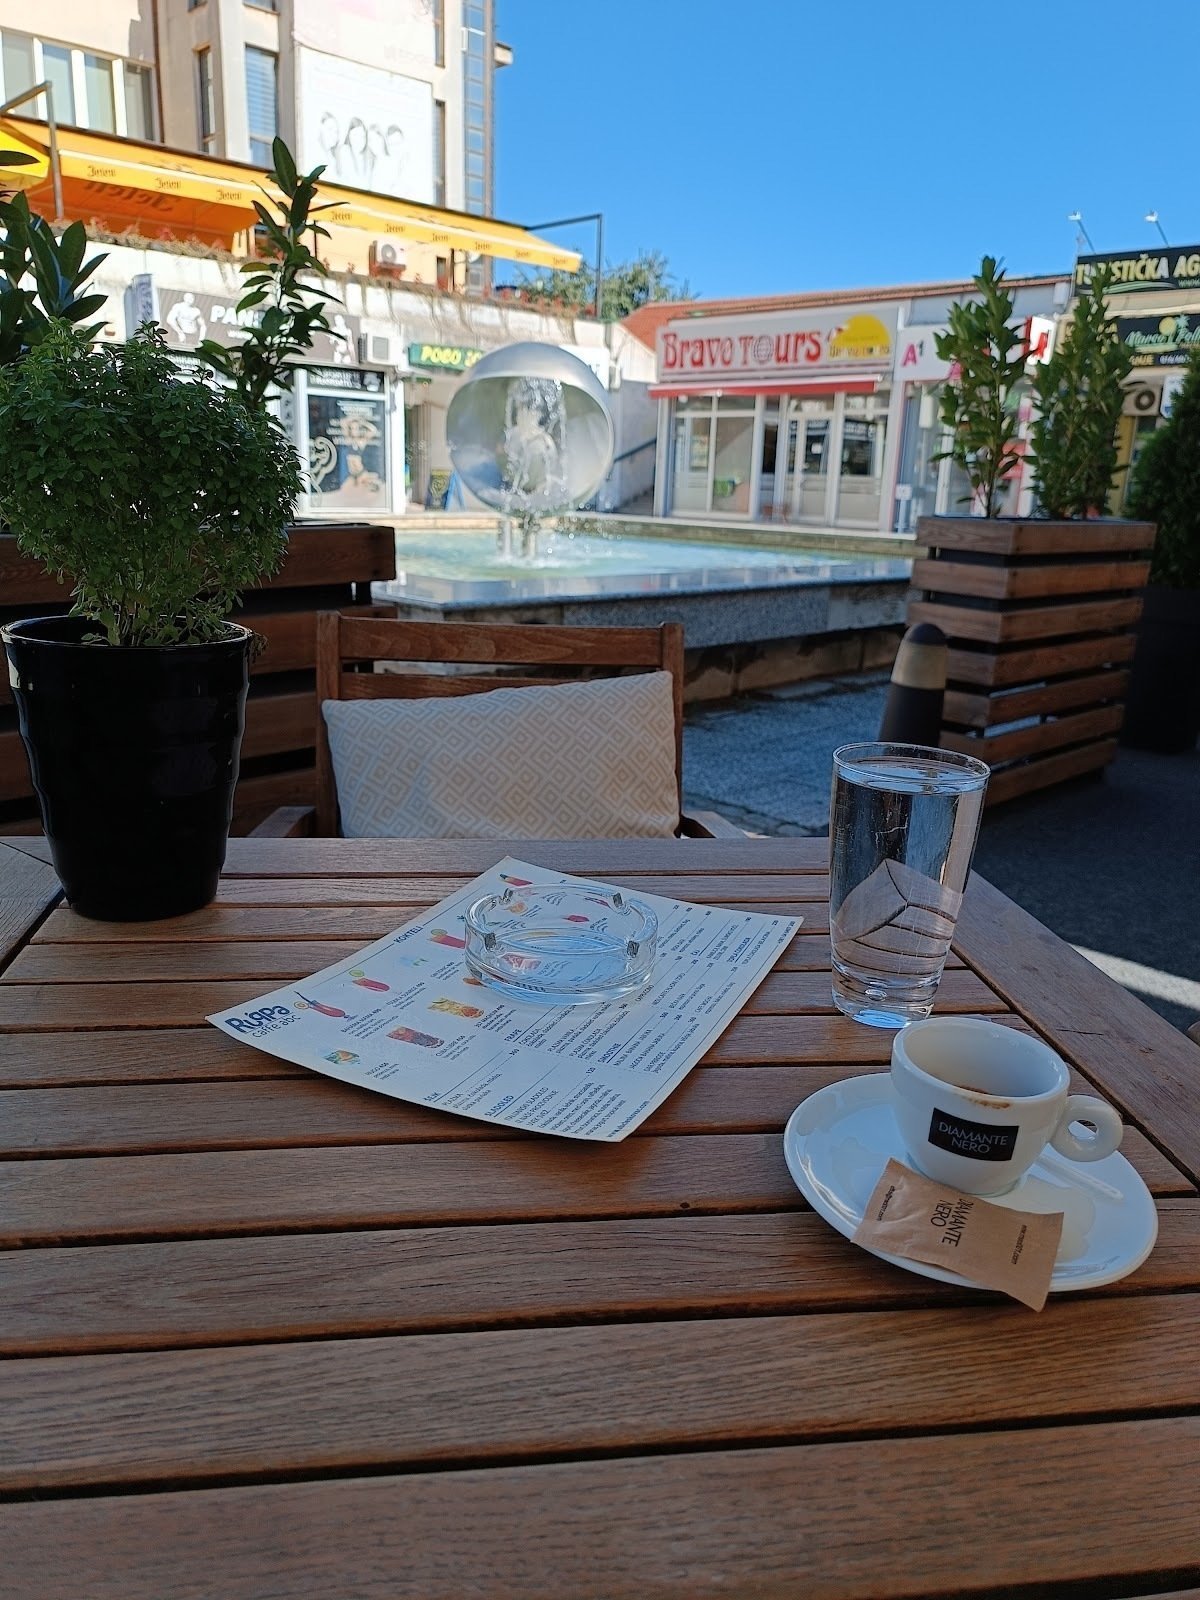 <span class="translation_missing" title="translation missing: en.meta.location_title, location_name: Cafe RUPPA ABC, city: Leskovac">Location Title</span>